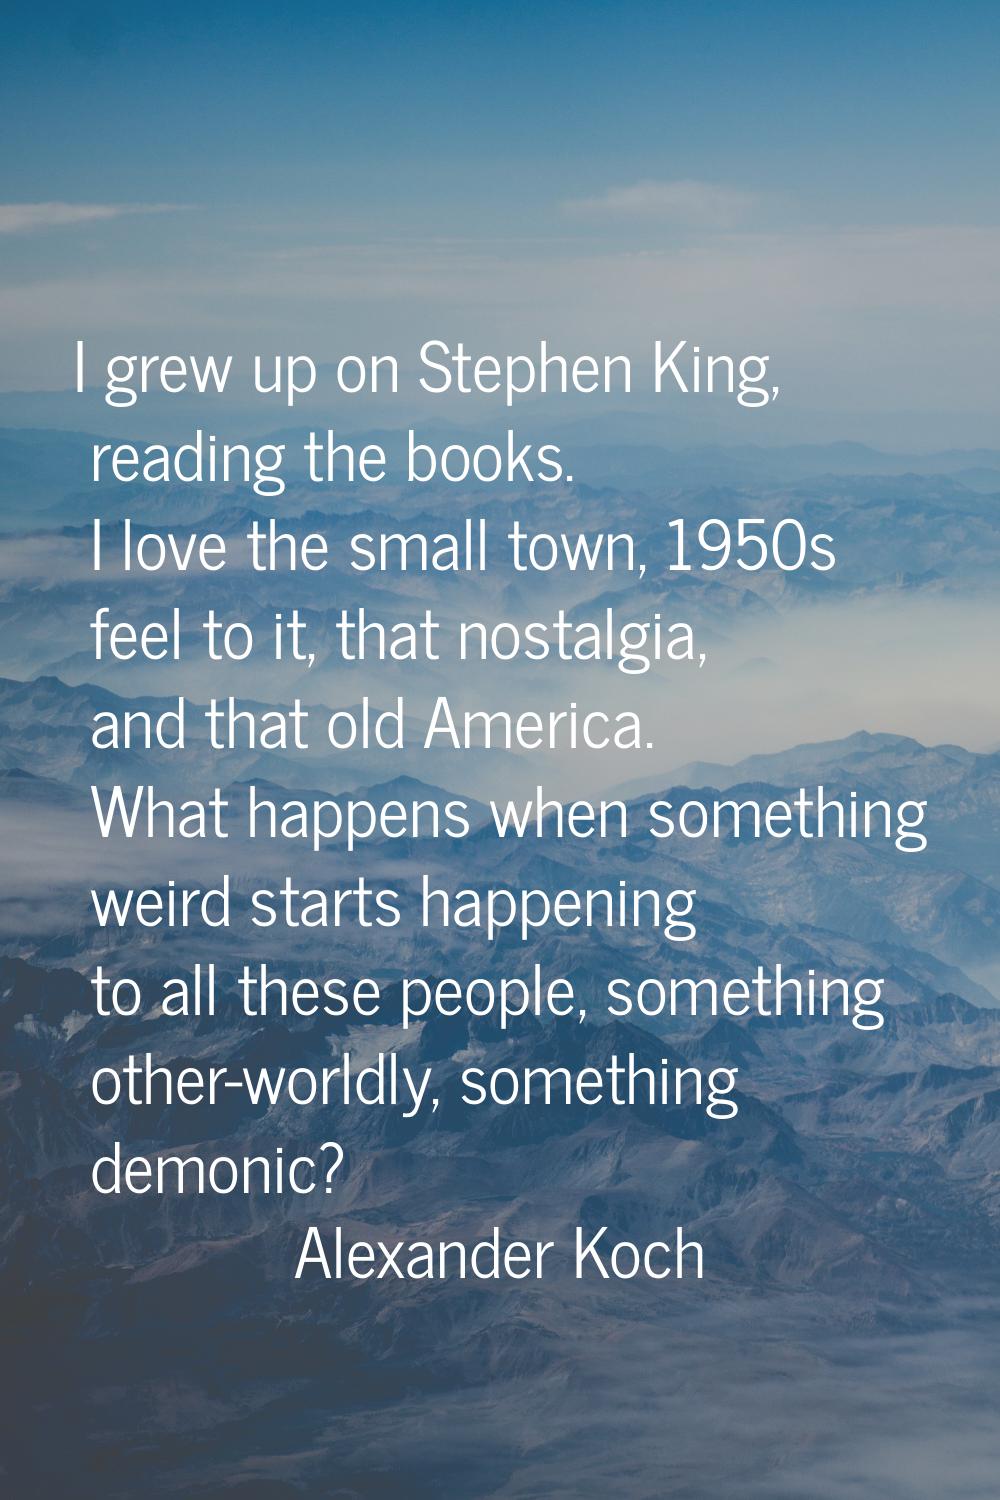 I grew up on Stephen King, reading the books. I love the small town, 1950s feel to it, that nostalg